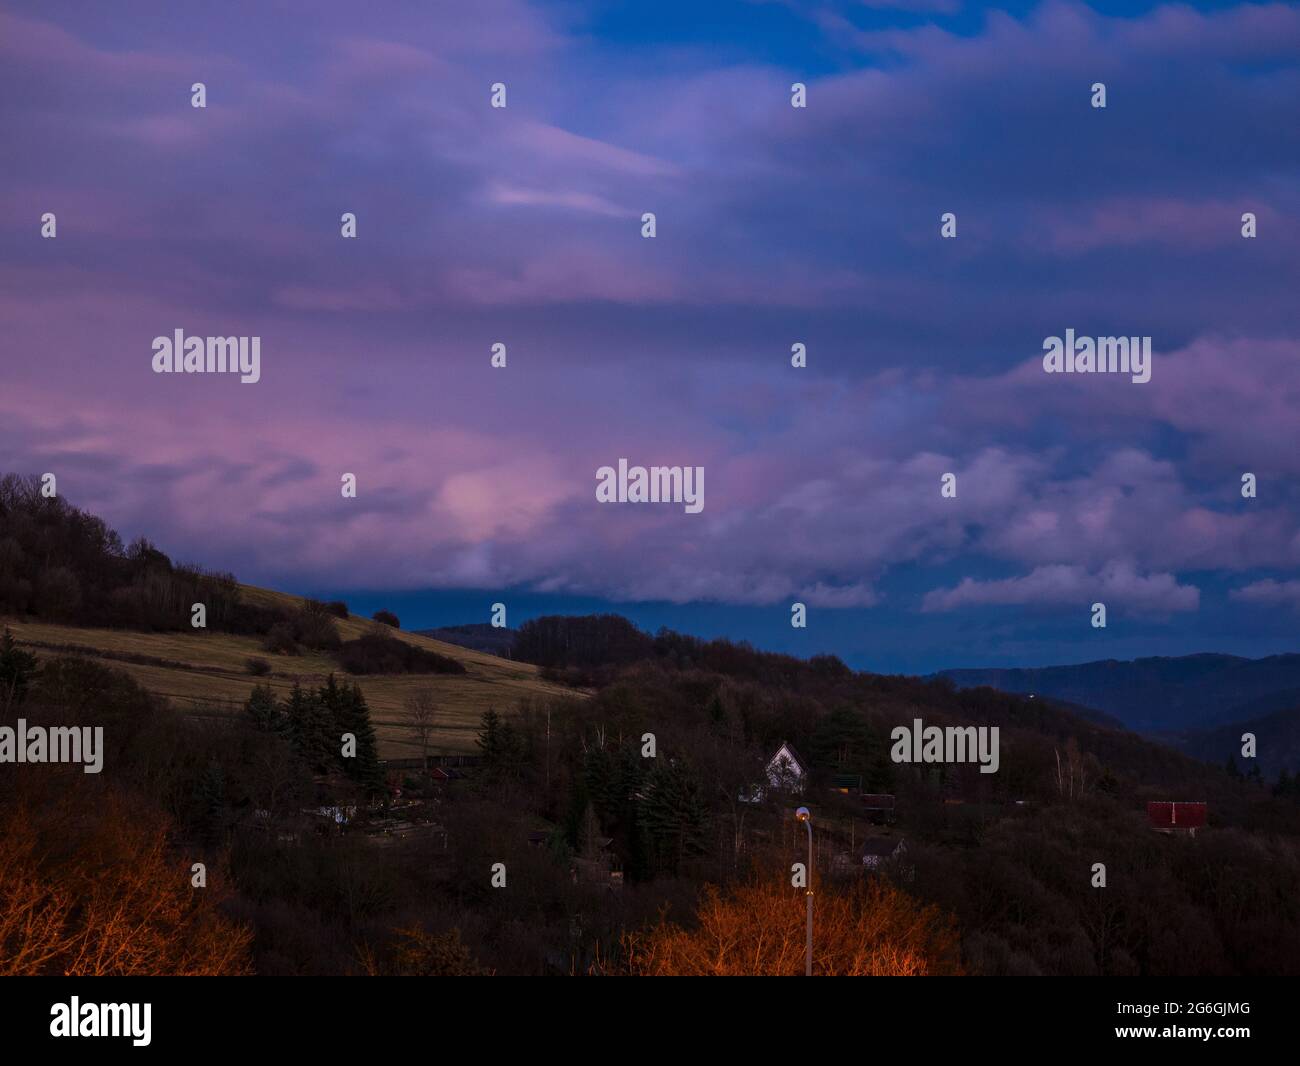 Massive clouds over hilly landscape in winter without snow, with shining street lamp in the foreground and tiny lights in the garden in the background Stock Photo